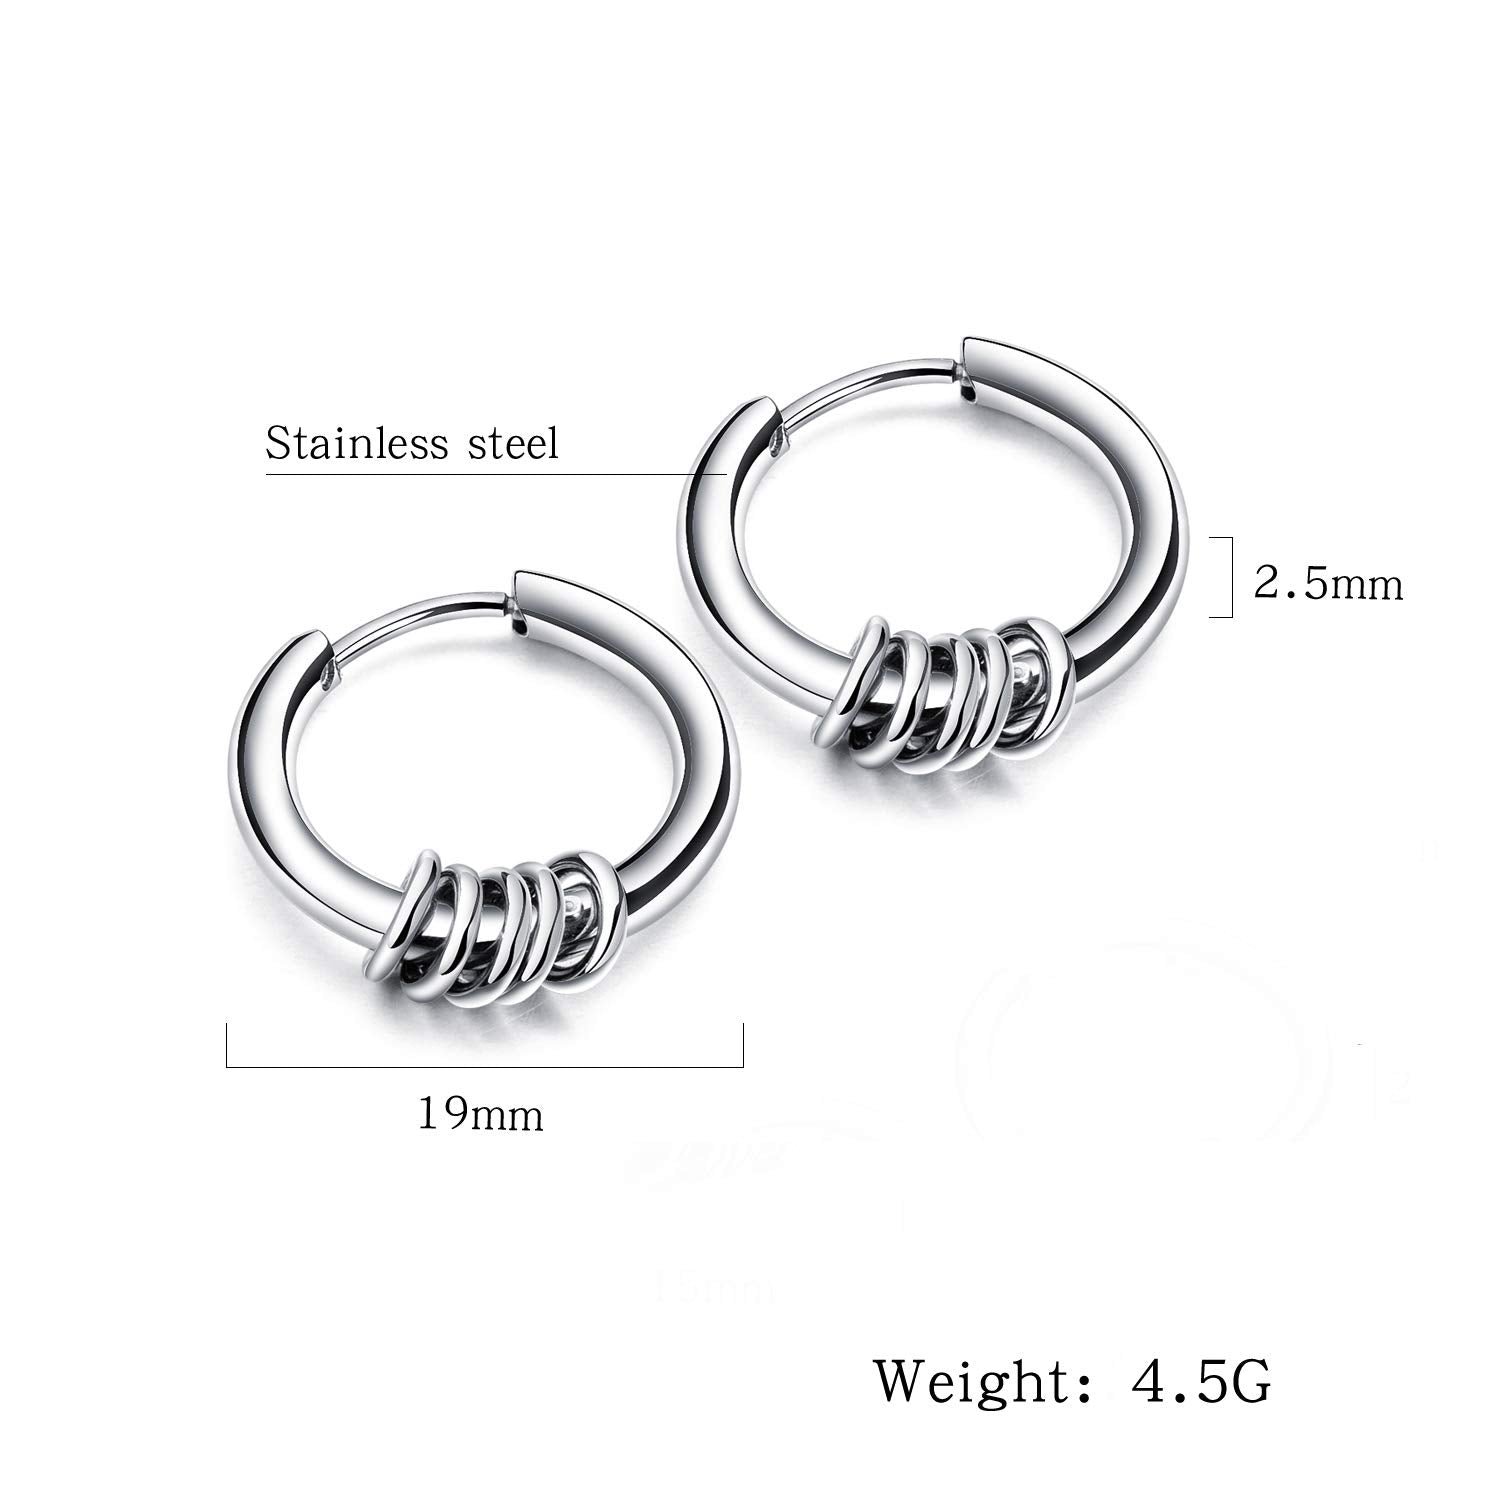 Yellow Chimes Stylish Combo of 2 Pairs Stainless Steel Combo Hoops Earrings for Boys and Men